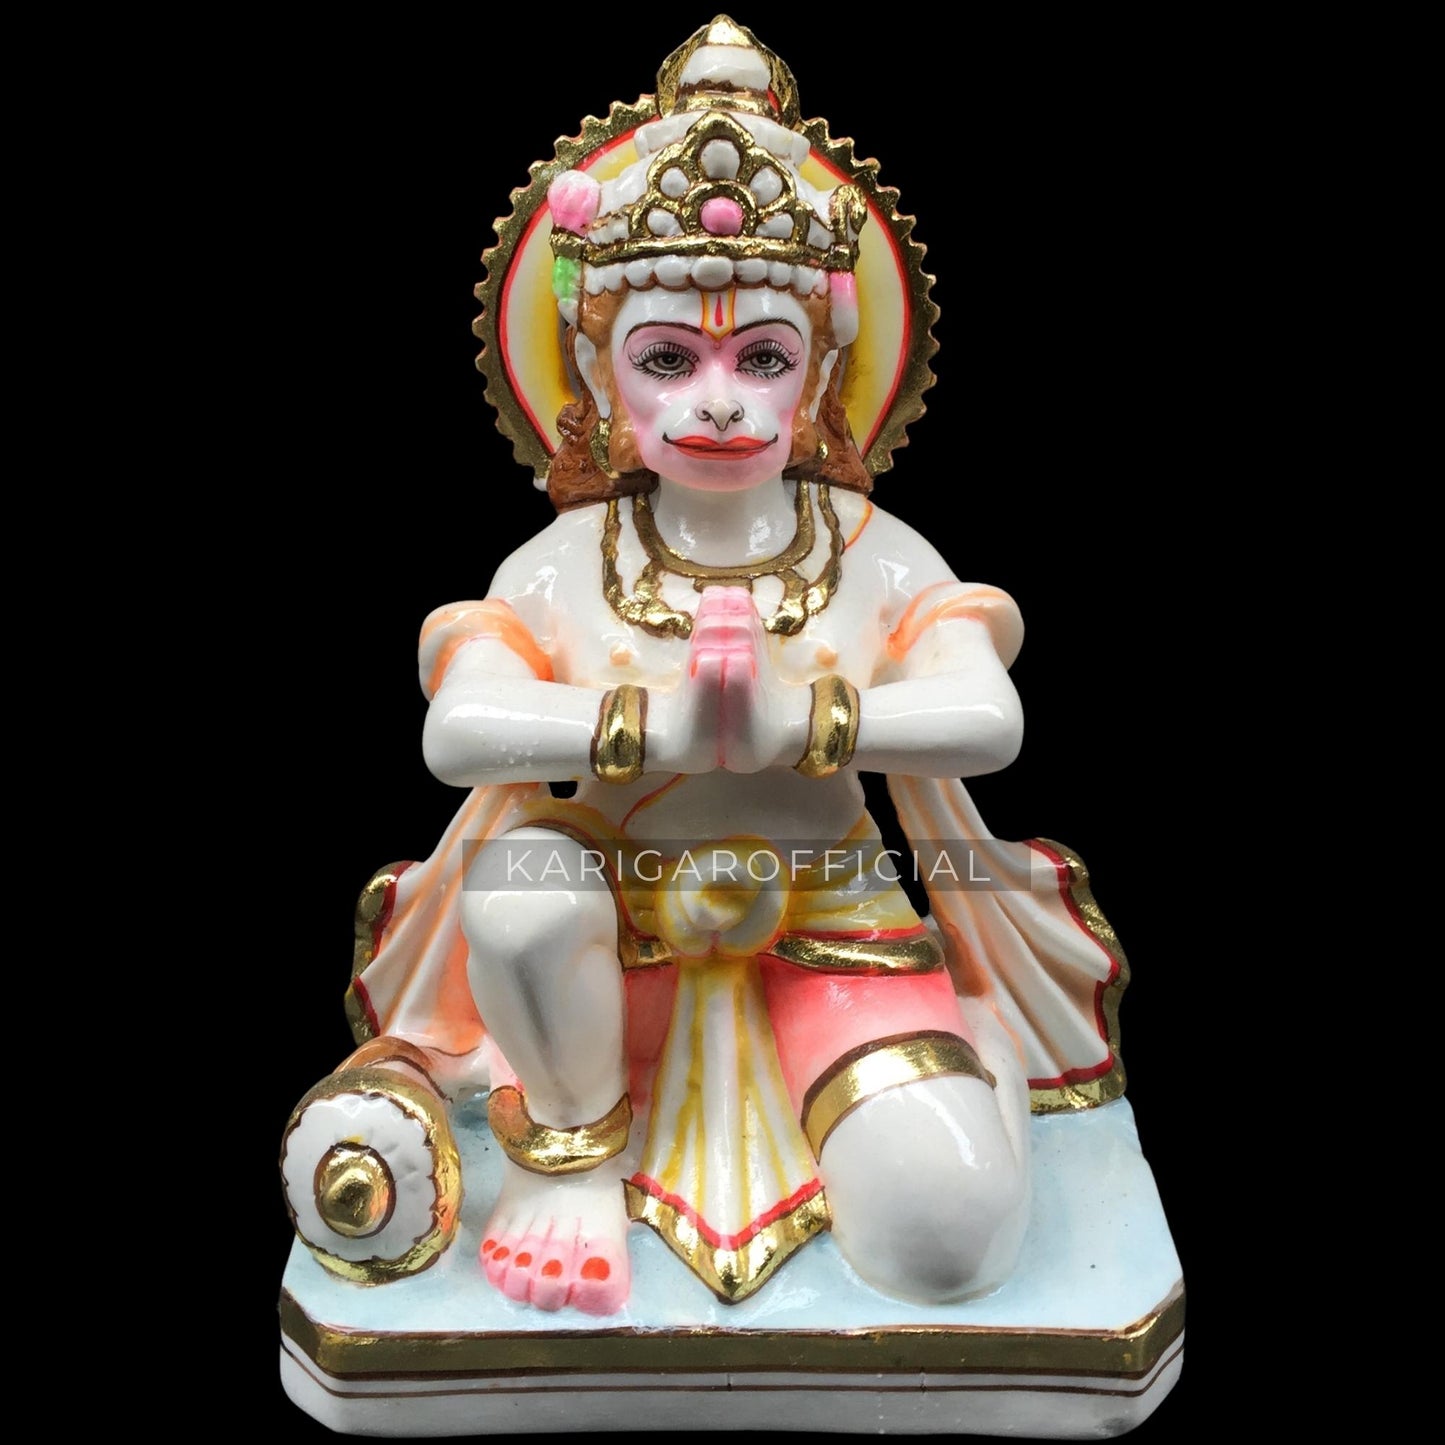 KARIGAROFFICIAL Hanuman Statue Marble Murti Beautiful Gold Leaf Bajrang Bali Figurine Large 9 inches Hand Painted Blessing Hanuman Idol Hindu Monkey god of Devotion, Small Home Temple Sculpture Gifts